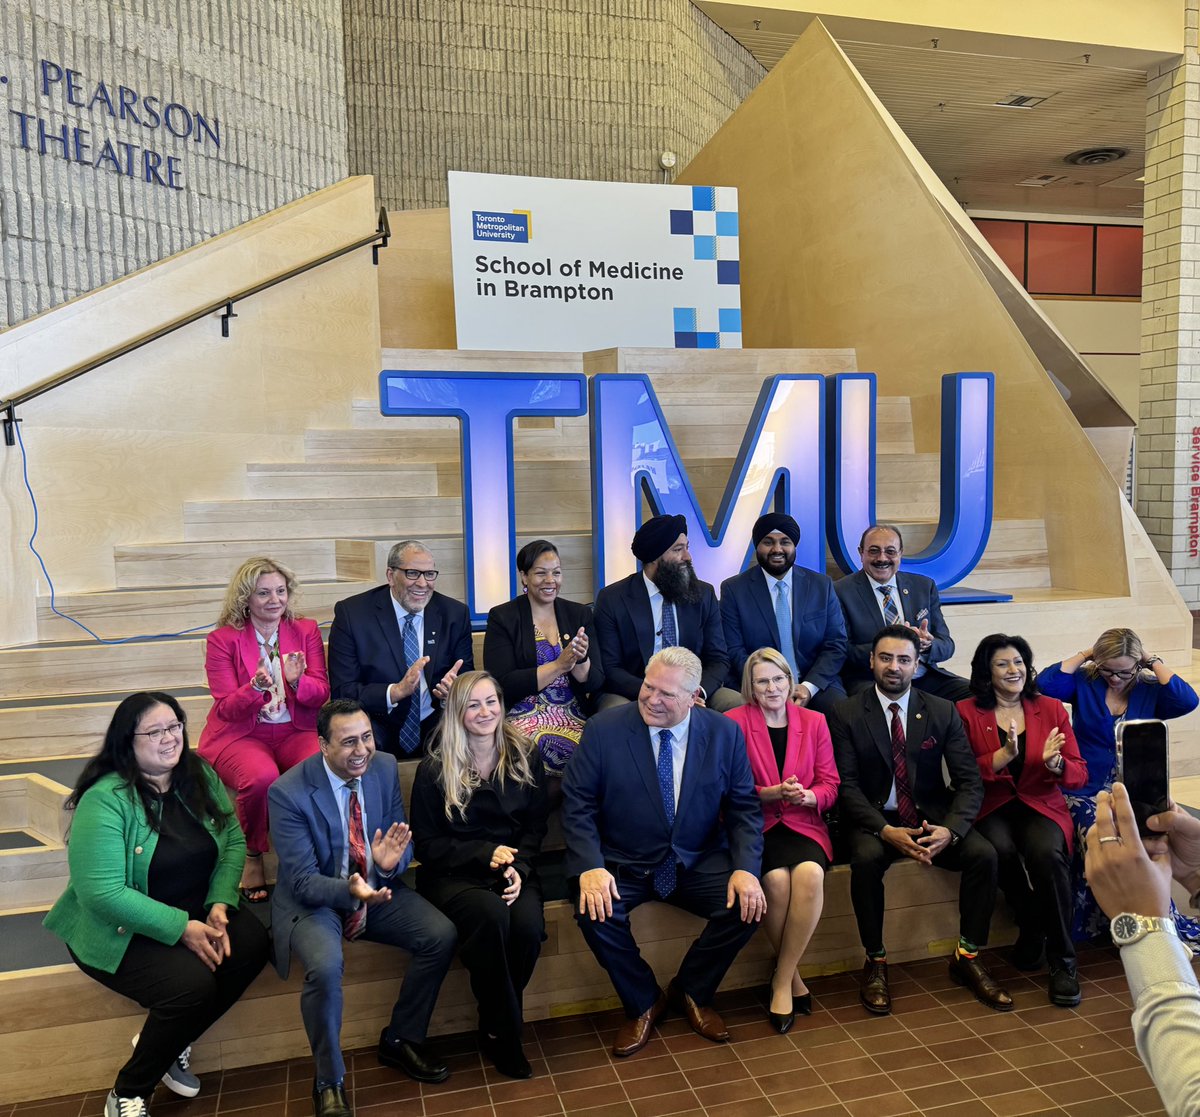 Thrilled to join @fordnation & my colleagues to unveil the future home of the @TorontoMet school of medicine in Brampton!

This is the first school of medicine opened in the province in over 15 years. 

The next generation of doctors will be trained in Ontario, for Ontarians! 🏨